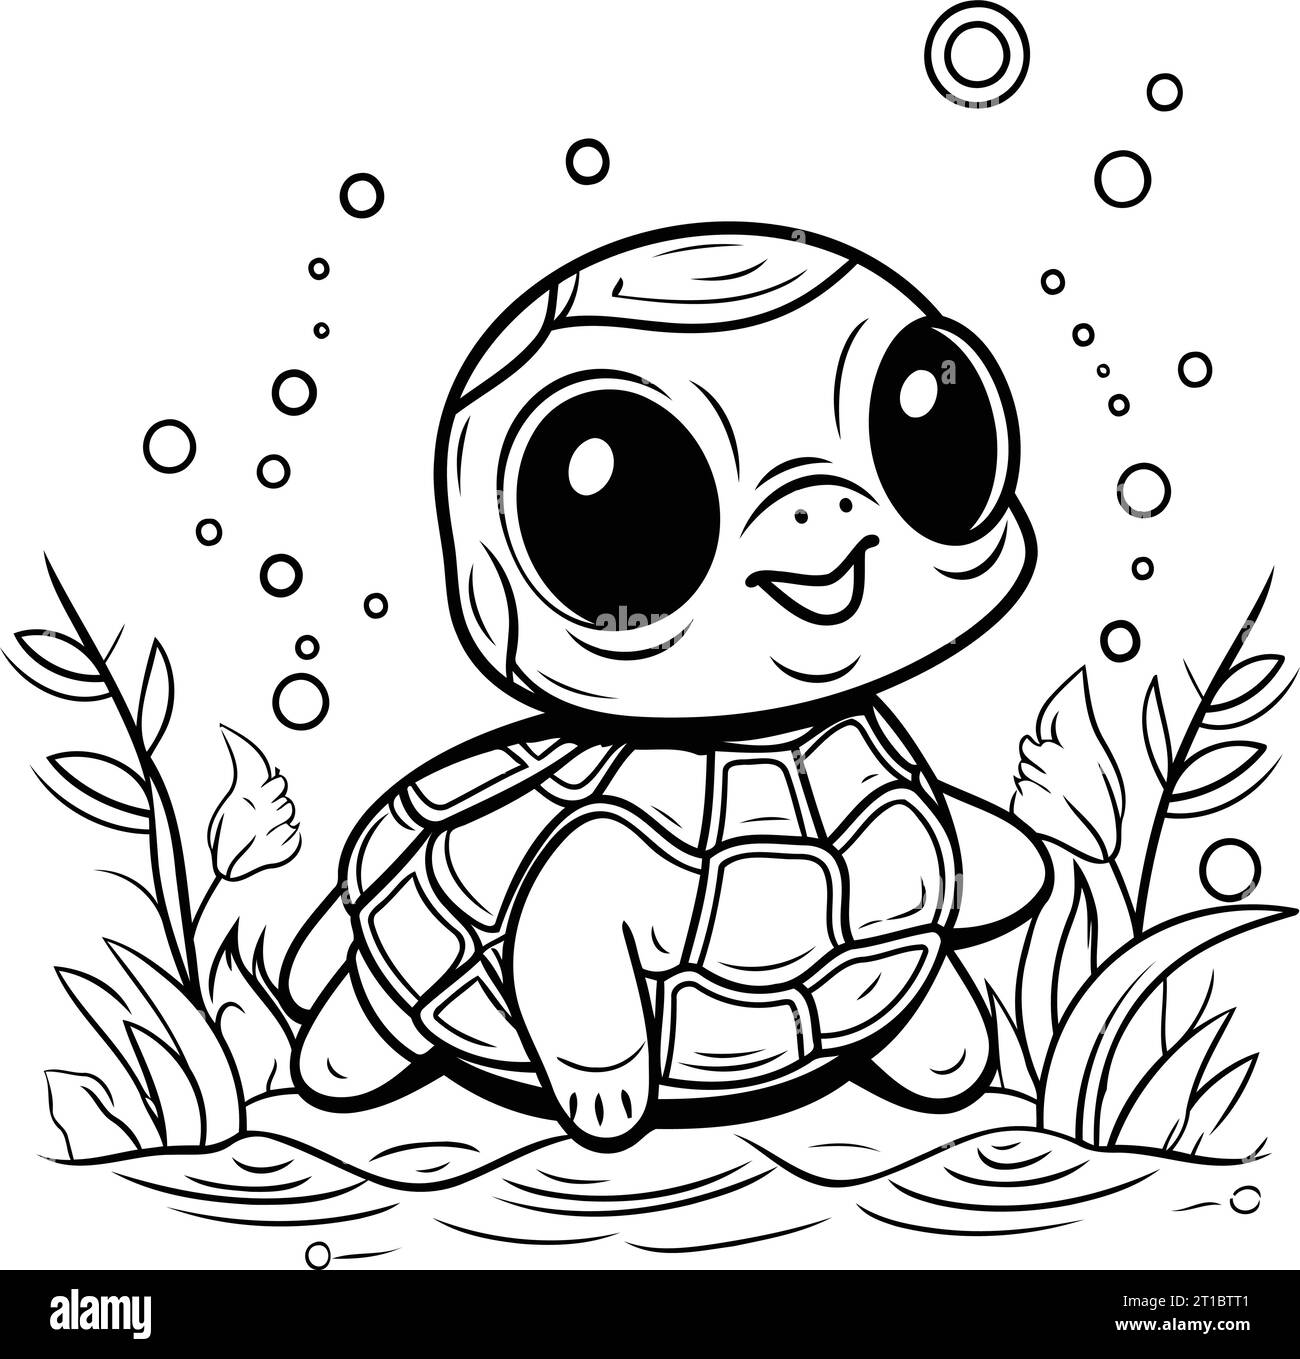 Cute little turtle in the sea. Black and white vector illustration. Stock Vector